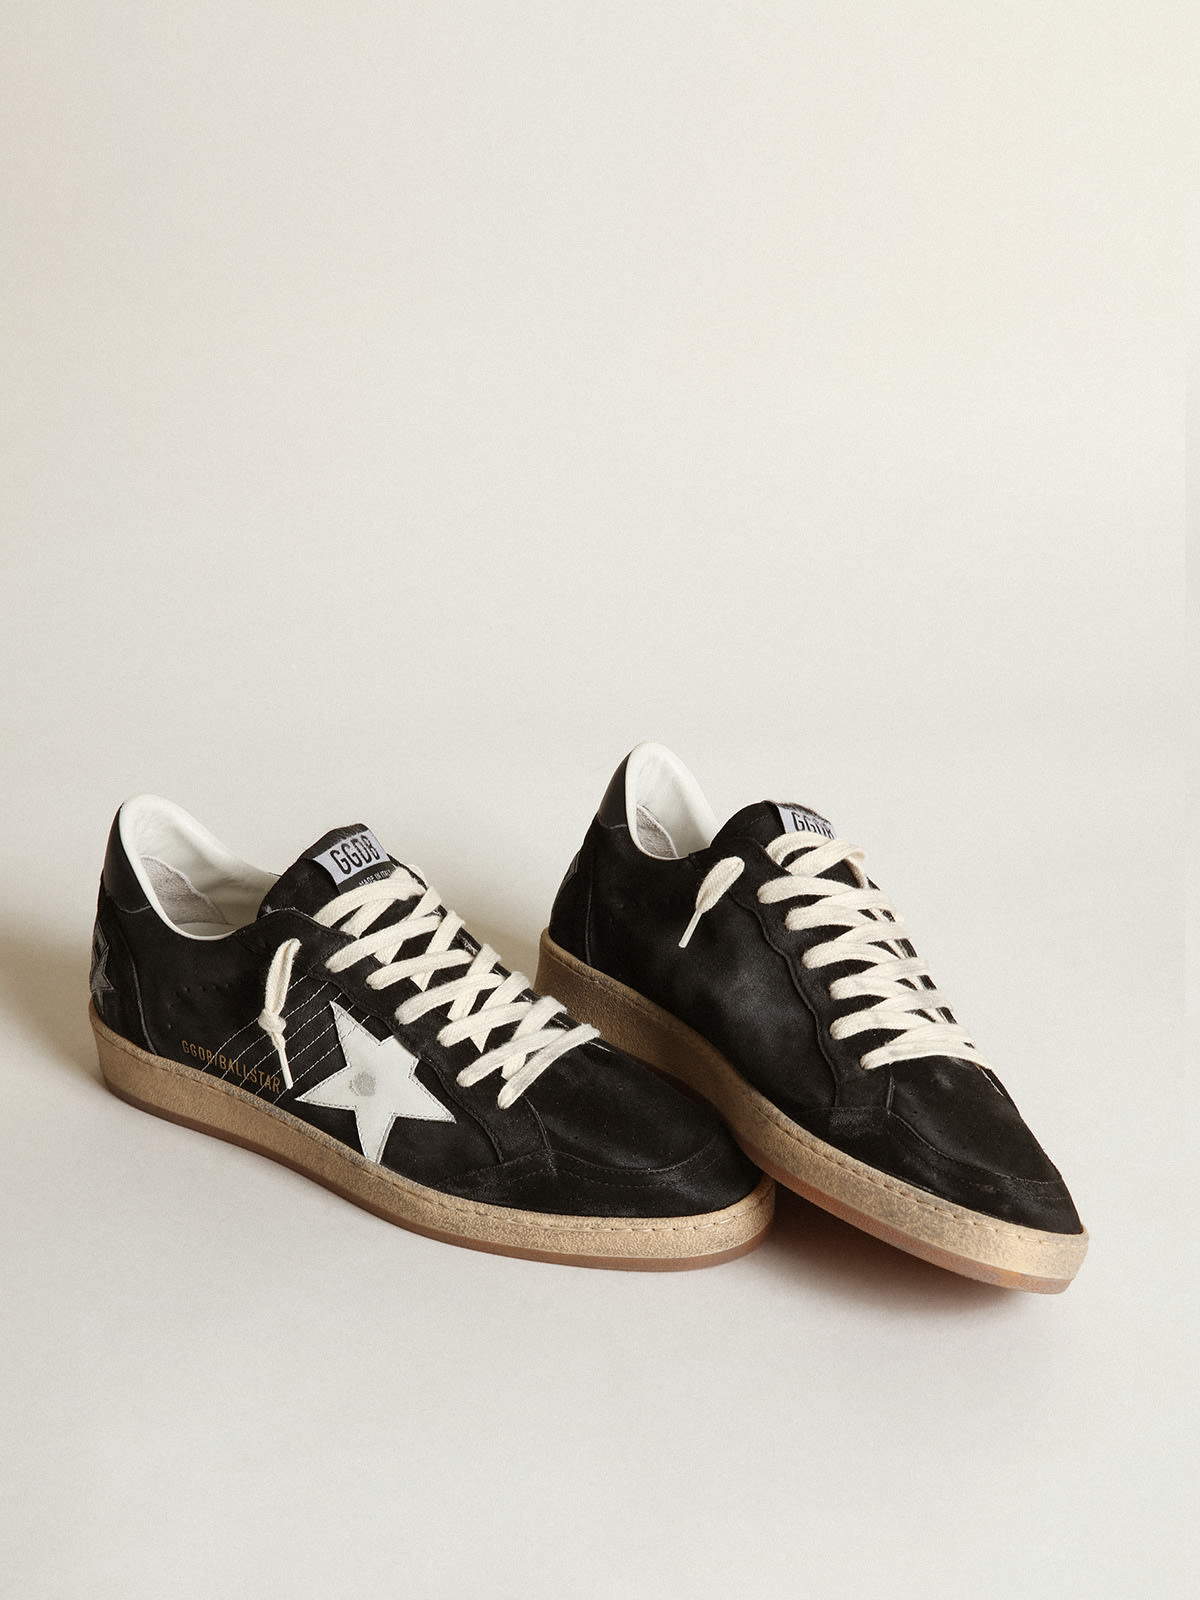 Golden Goose - Men’s Ball Star sneakers in black suede with white leather star and black leather heel tab in 